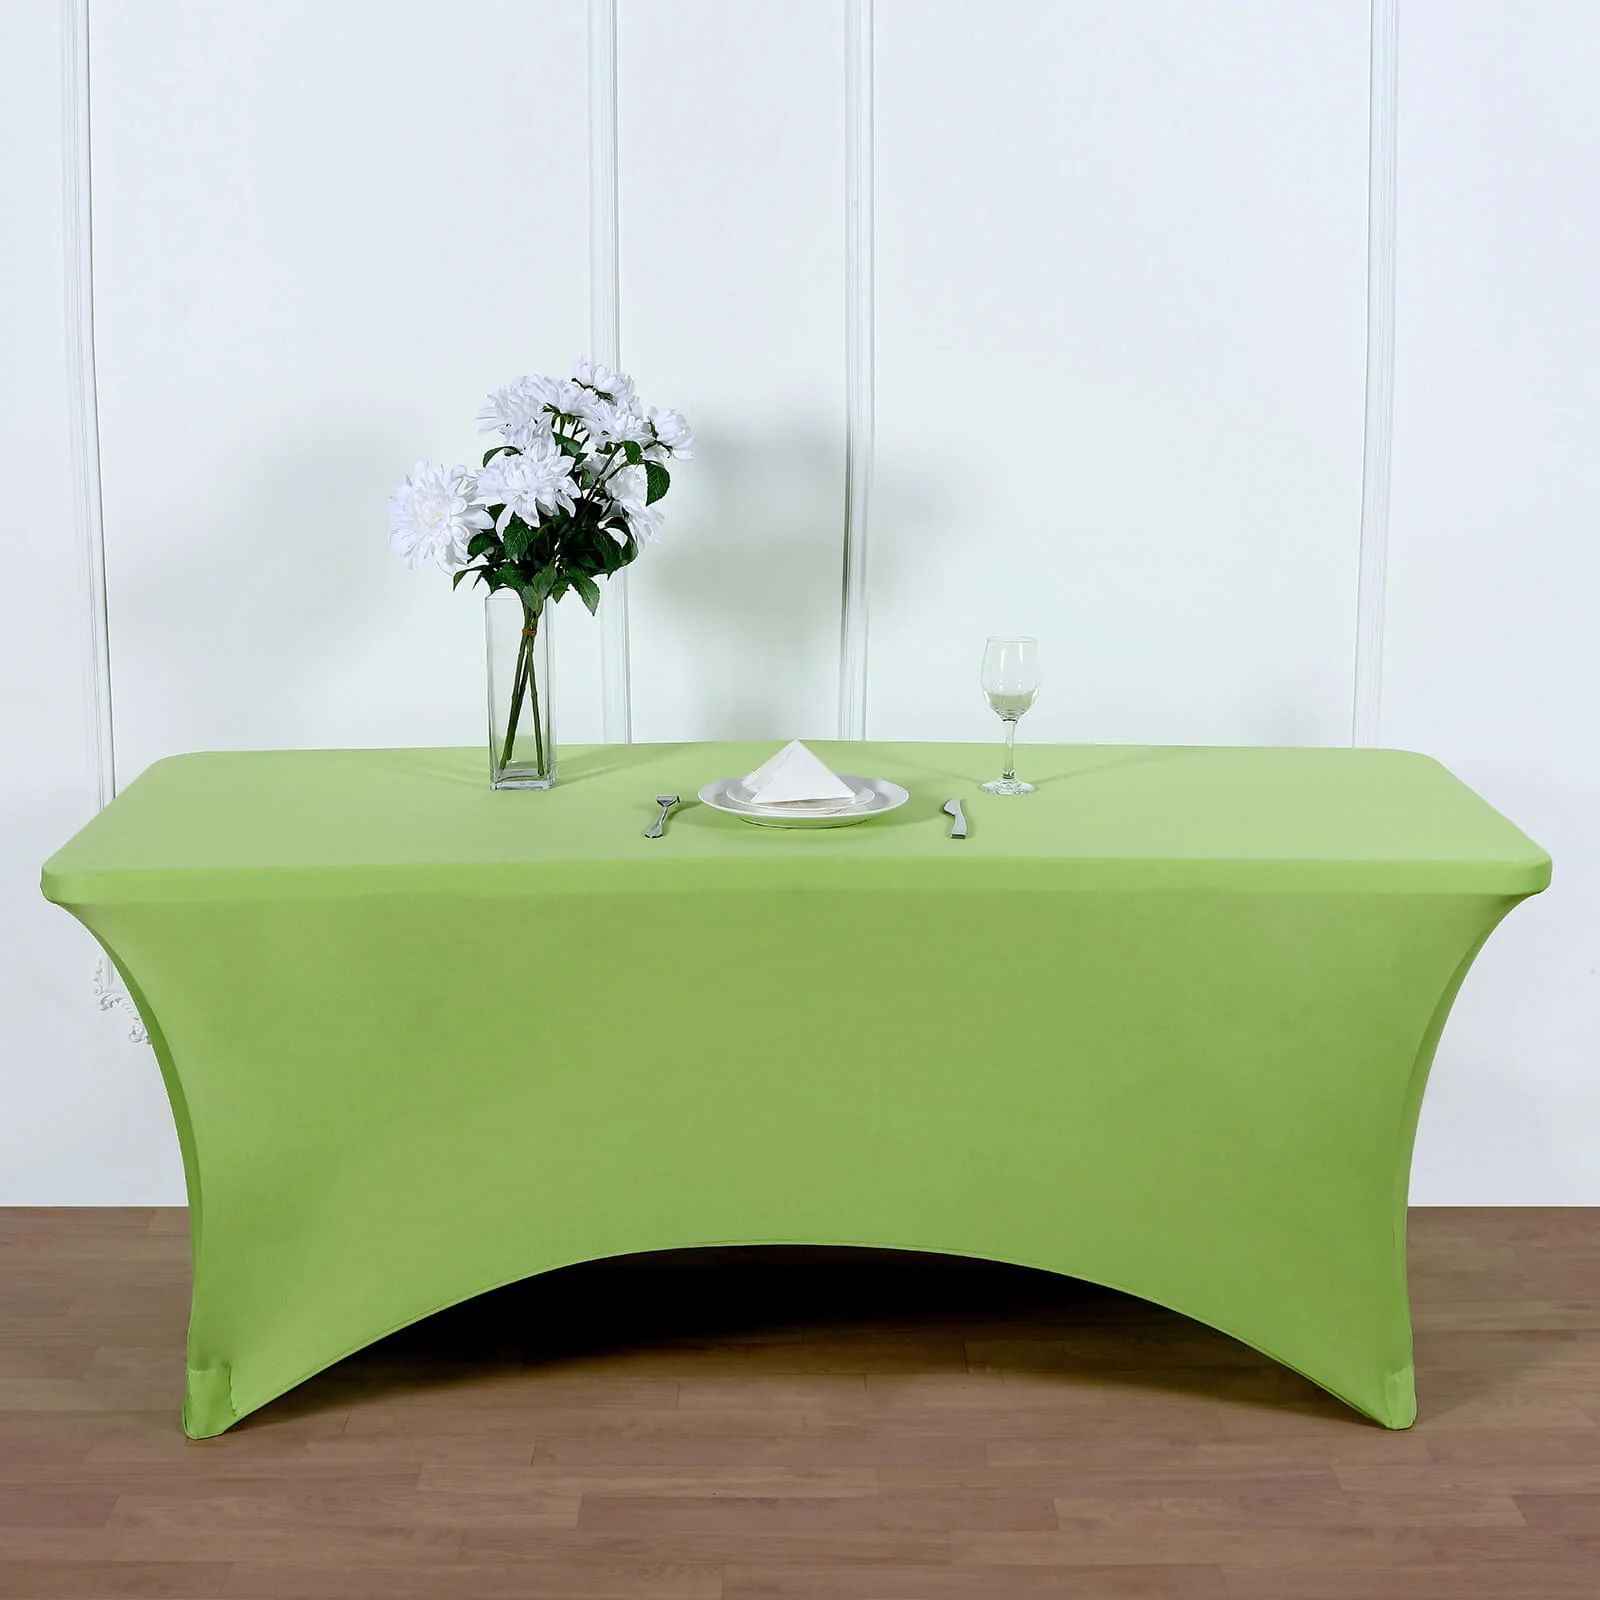 Apple Green - 6 Ft Rectangular Spandex Table Cover Wedding Party - £27.08 GBP